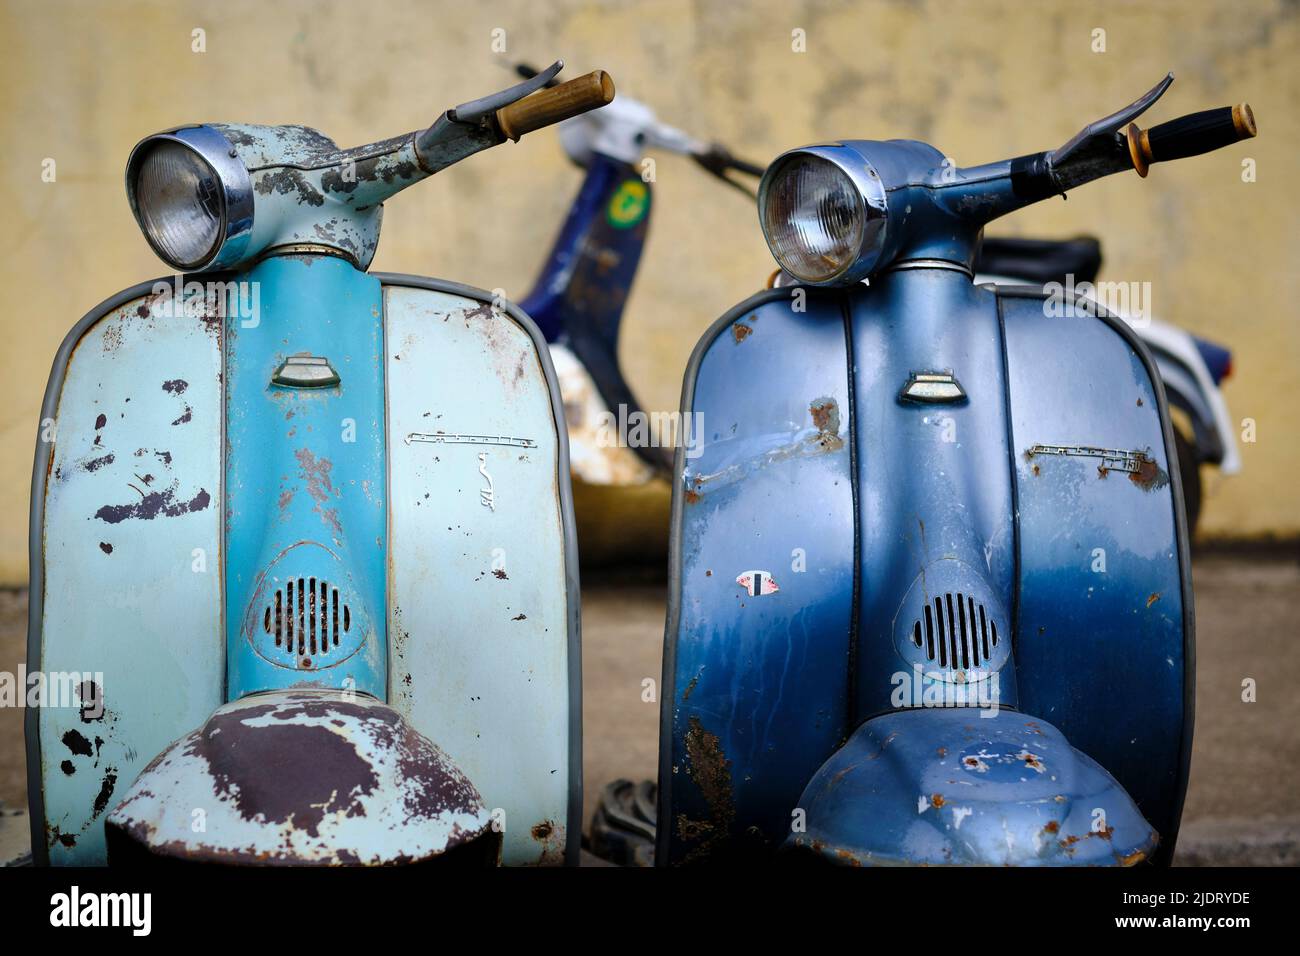 Details of vintage Lambretta scooters, featuring the 2-stroke engines that have been discontinued for environmental reasons Stock Photo